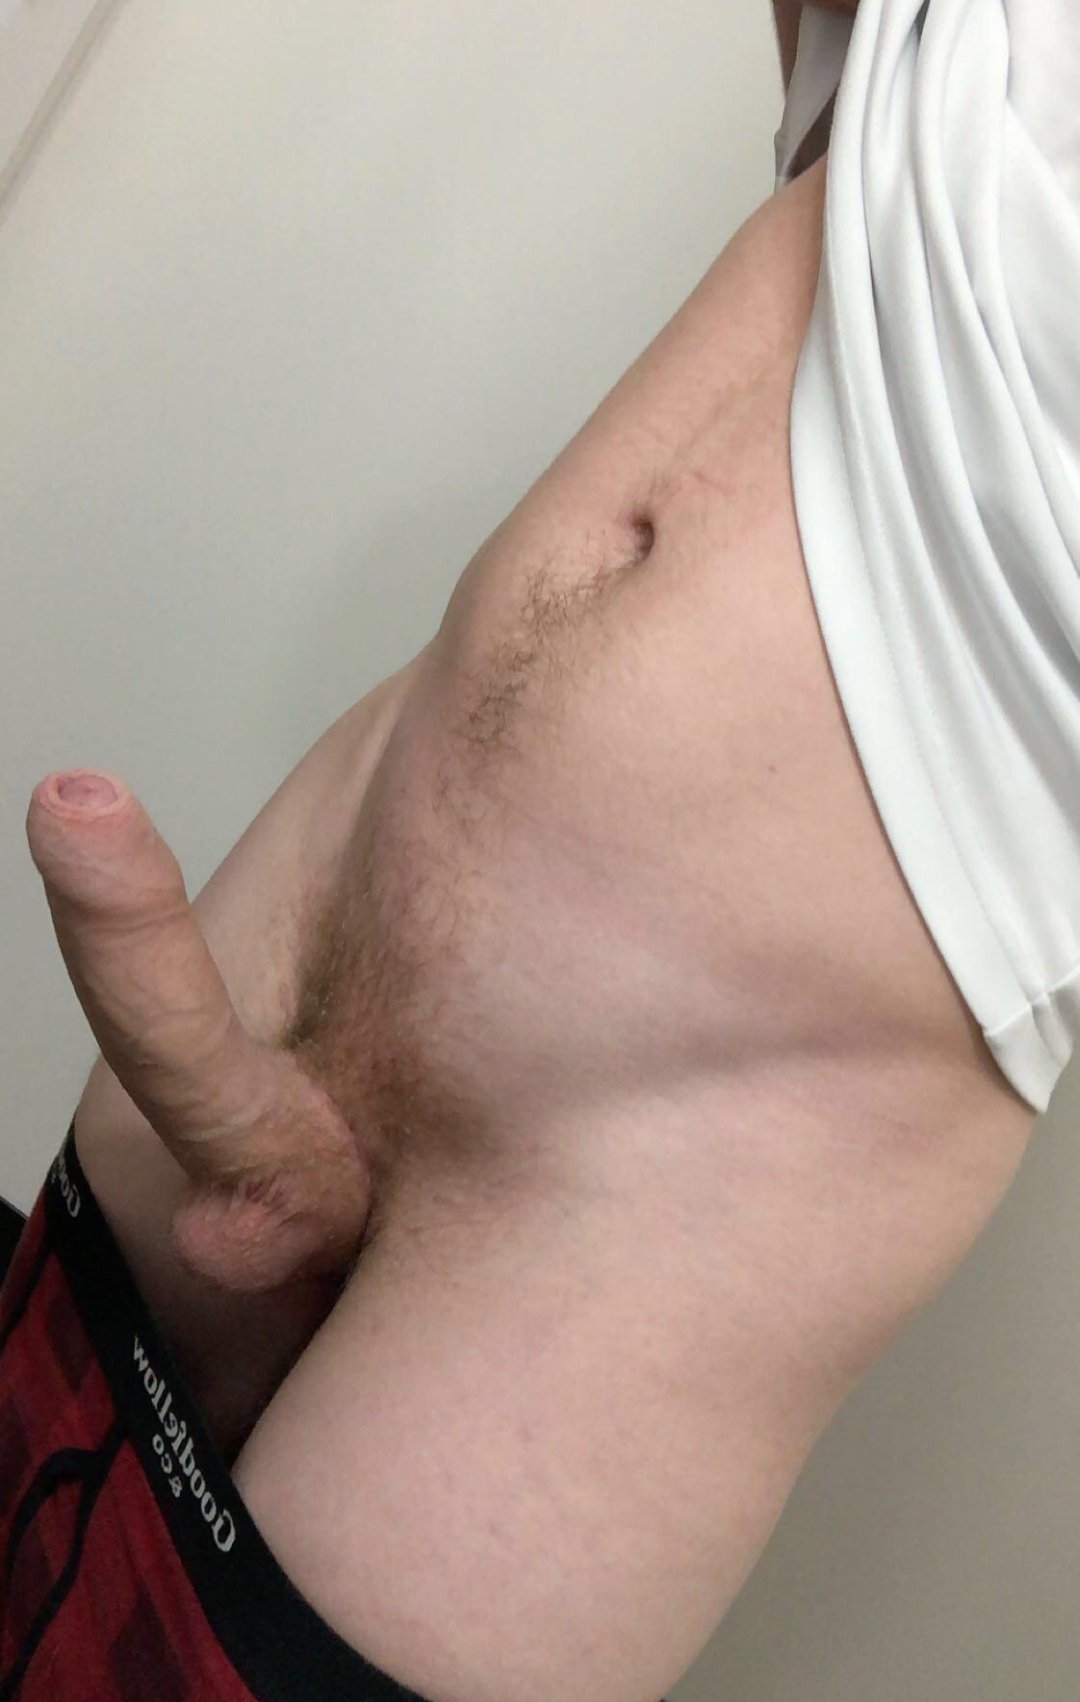 Very Small Hard Penis - Hard dick and small balls - Penis Pictures